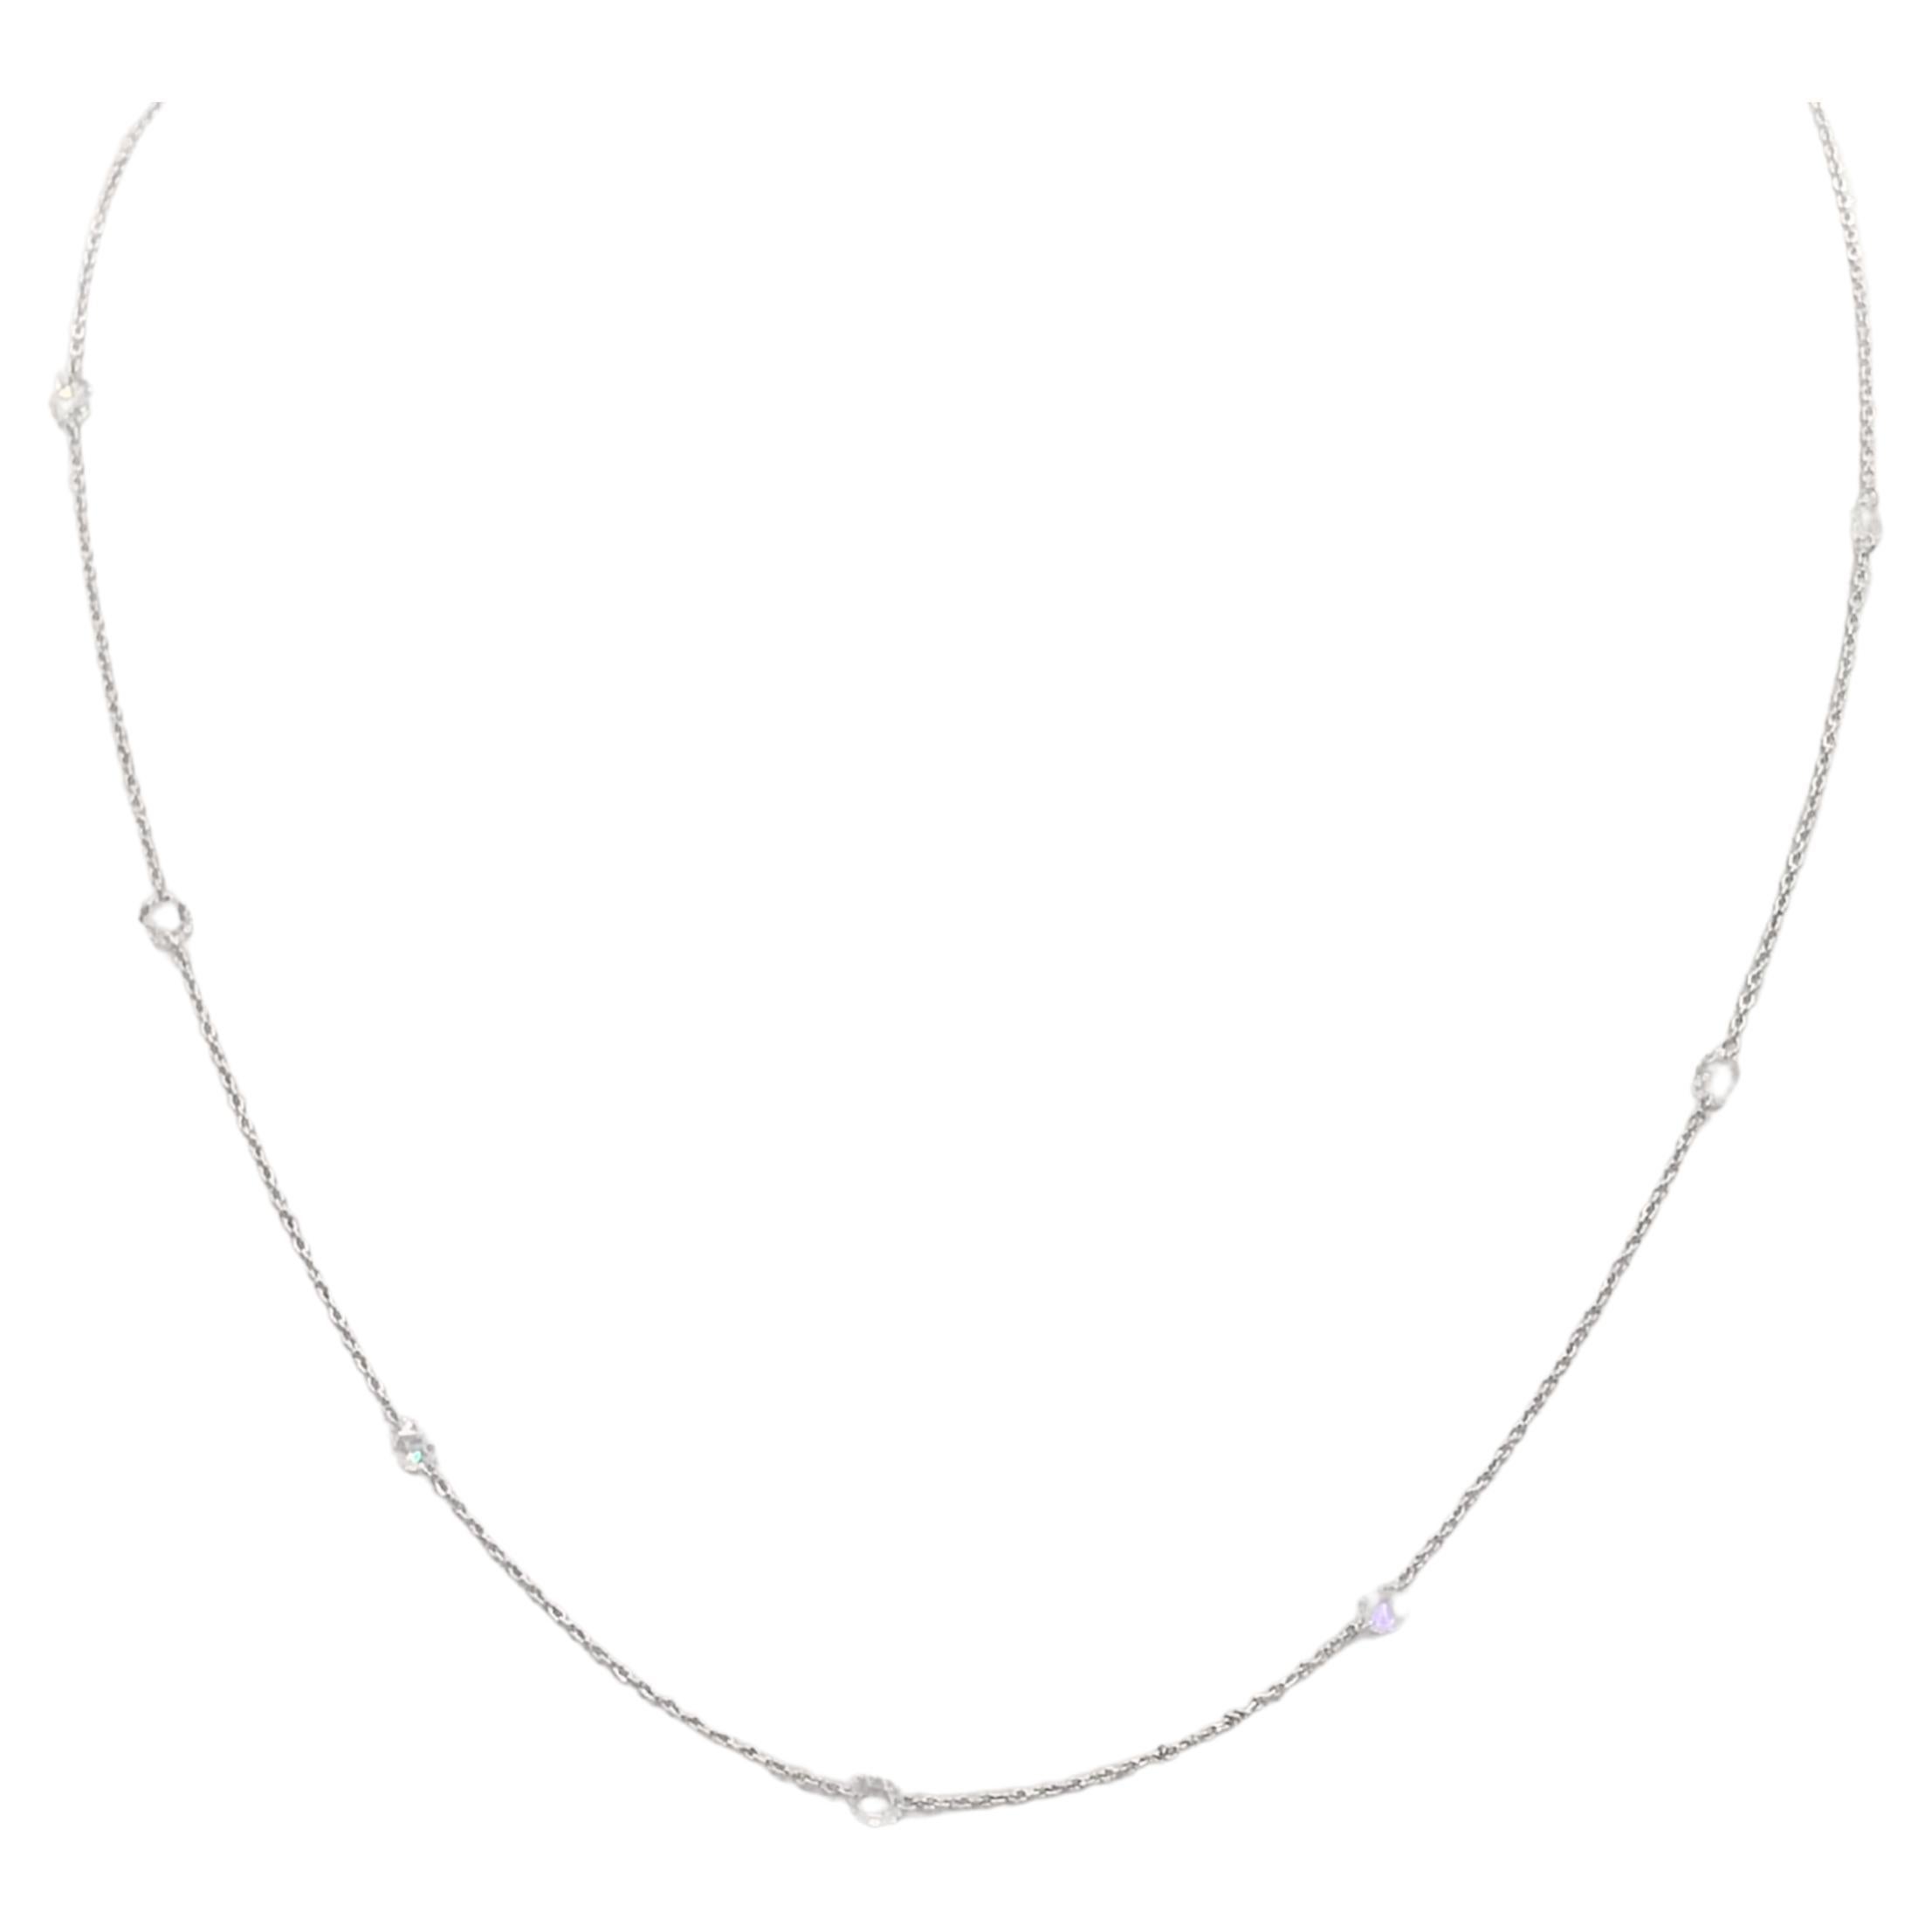 White Diamond Rose Cut Chain Necklace in 18K White Gold